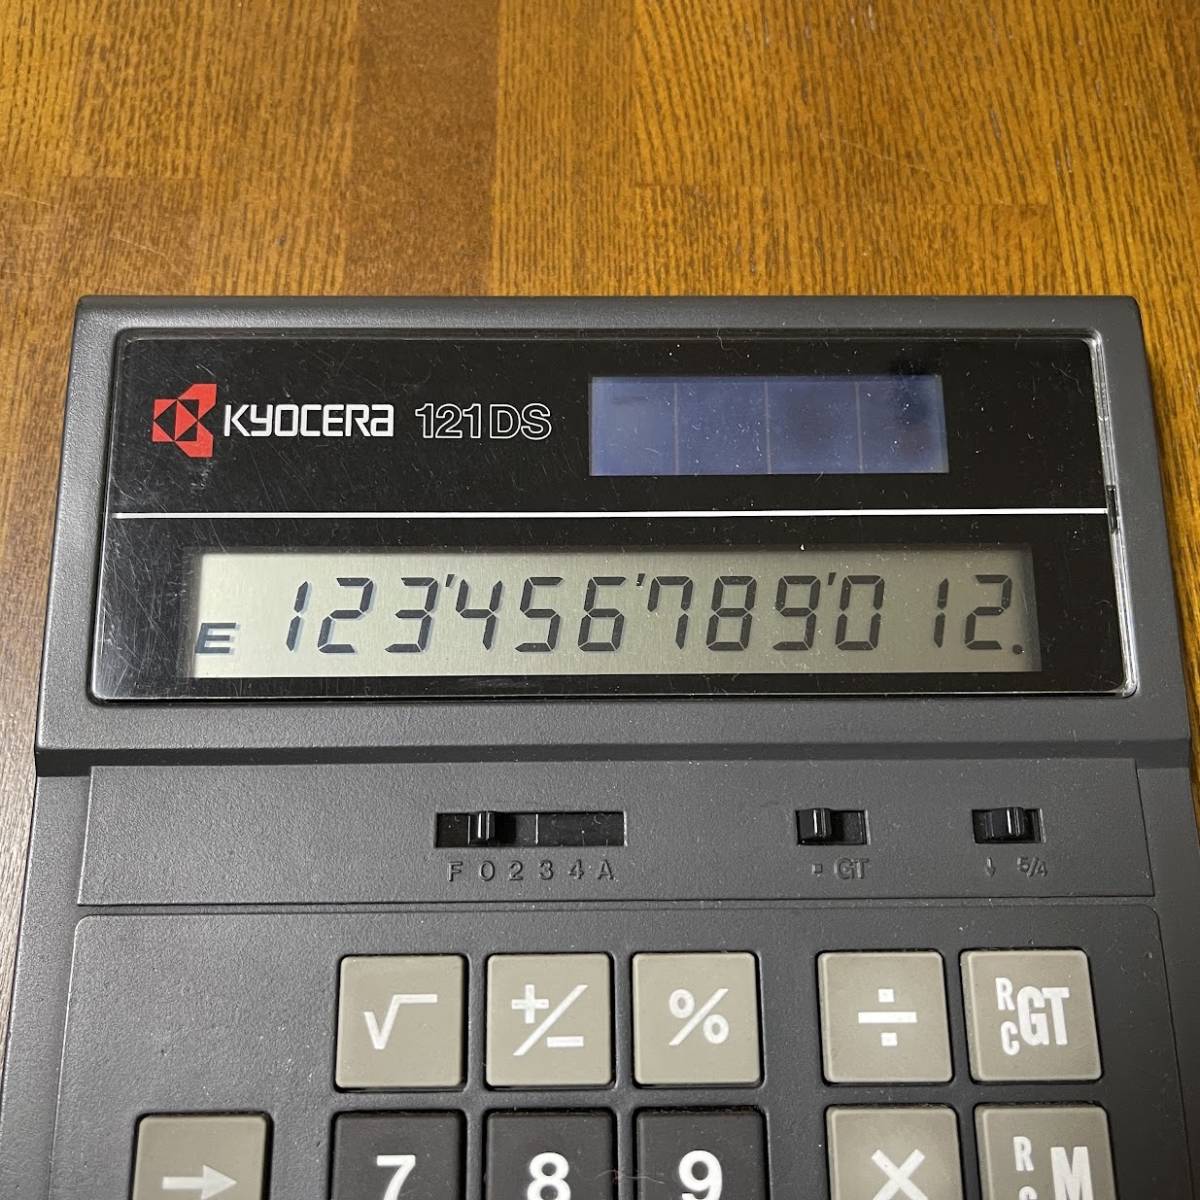  prompt decision! Kyocera KYOCERA solar calculator 121DS 1985 year gdo design . winning at that time regular price 12800 jpy battery un- necessary Showa Retro antique once Junk exhibition 